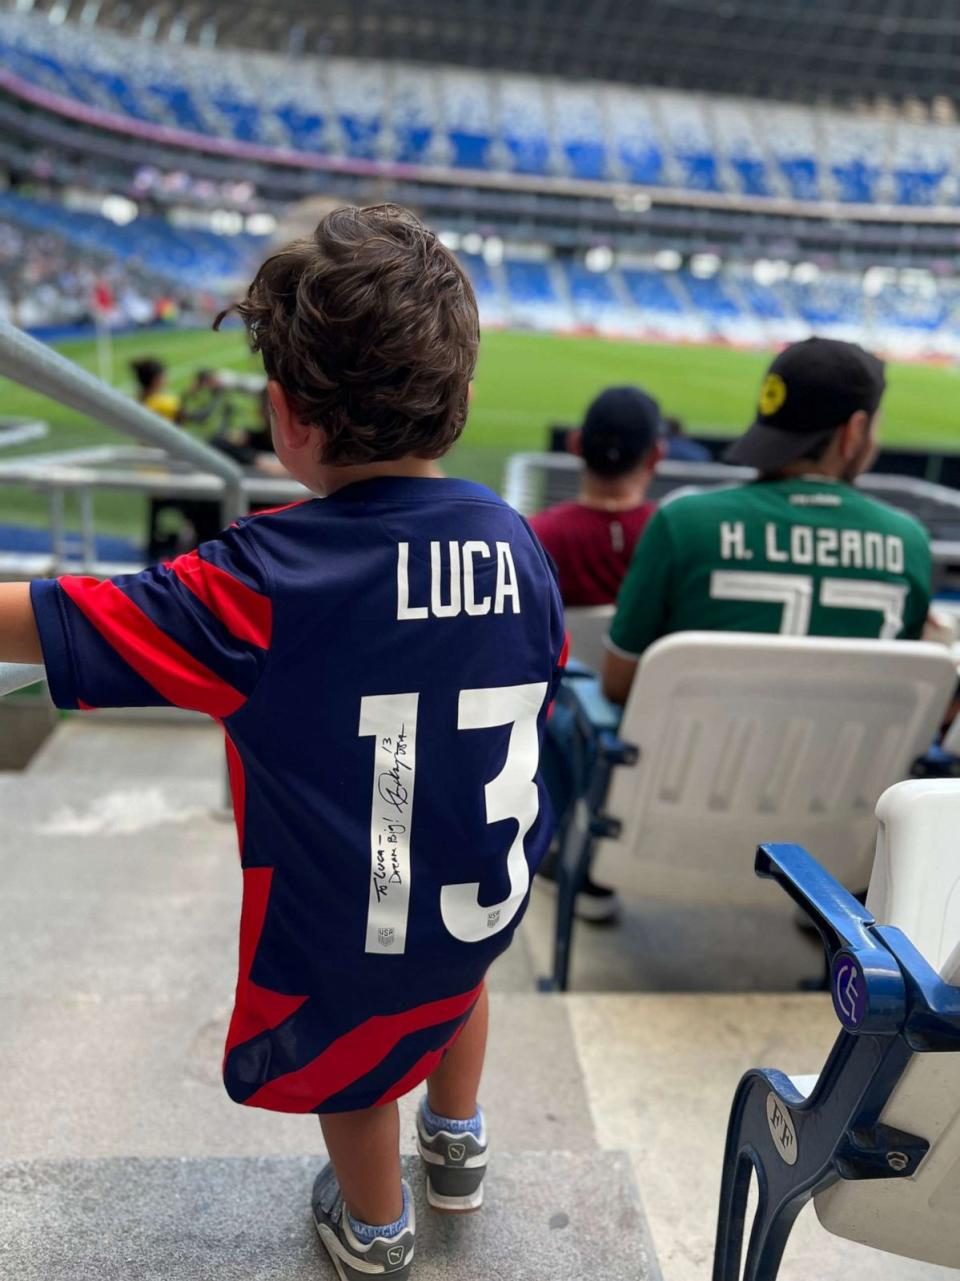 PHOTO: After noticing Luca's cheering, soccer star Alex Morgan couldn't resist surprising him with a special gift - a signed jersey! (Courtesy Ana Jackson)